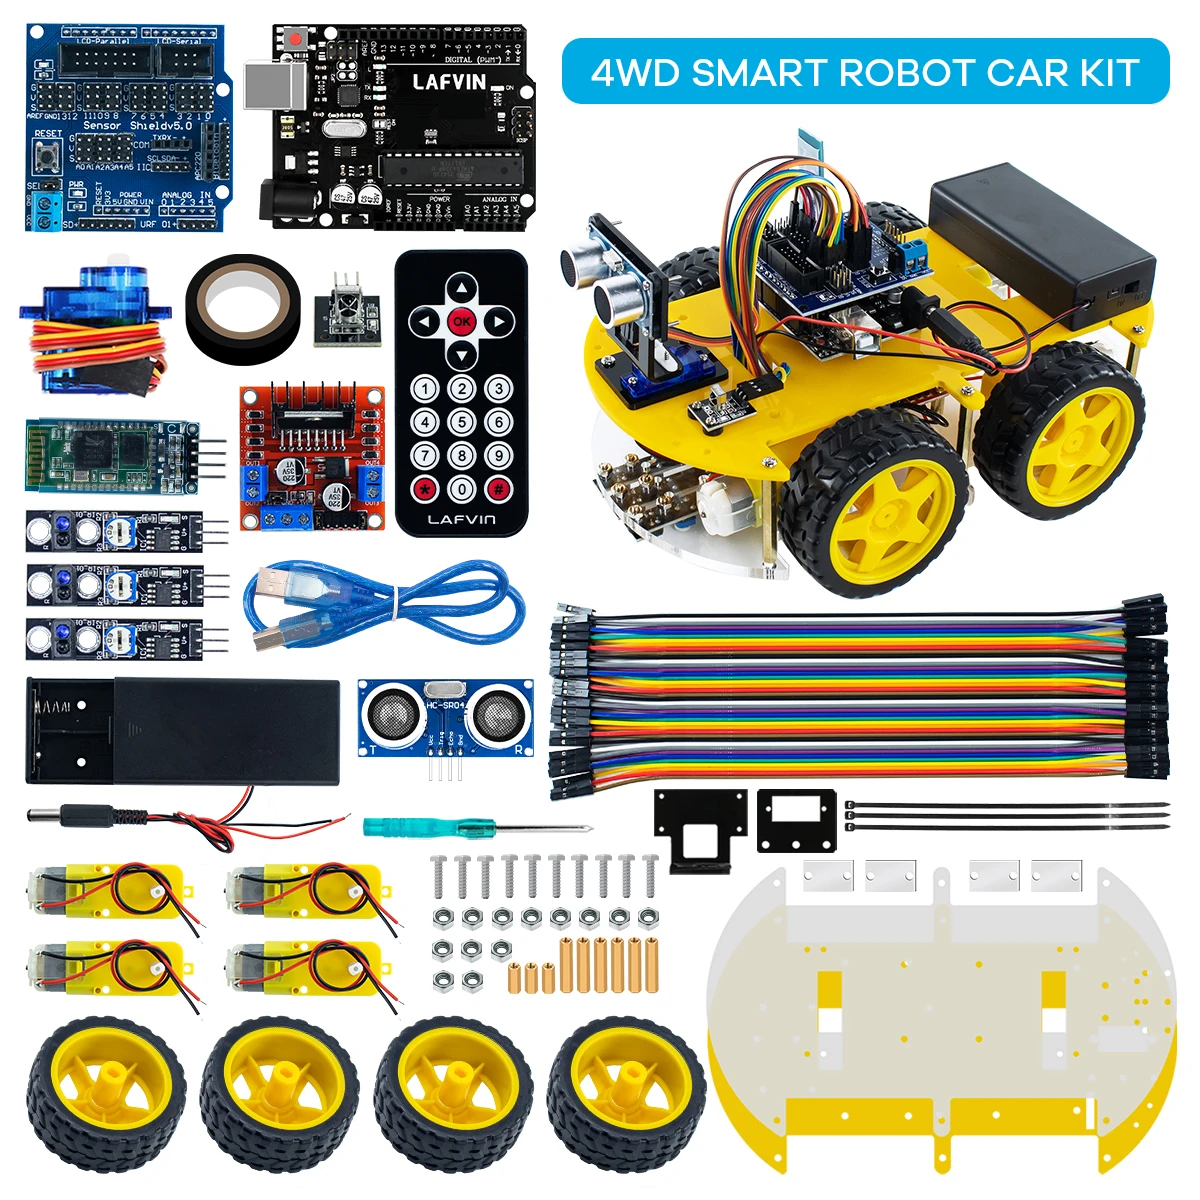 

LAFVIN Robot Car Kit for Arduino for UNO R3 Programming Project 4WD Robotic Kit DIY Automation Toy Car Set with Tutorial